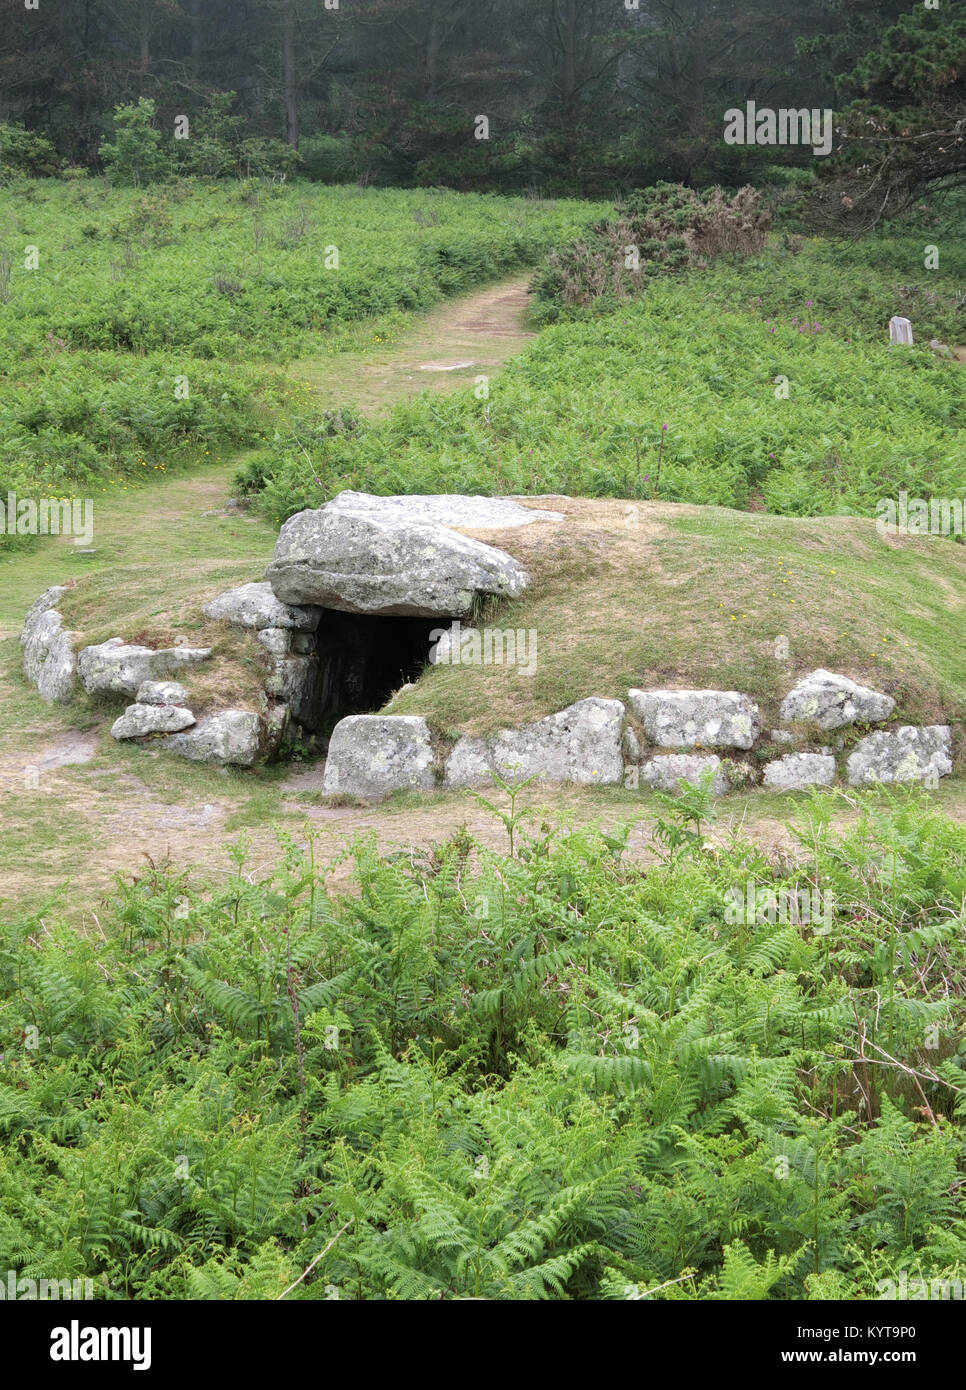 Upper Innisidgen Bronze Age Burial Chamber or Entrance Grave, Porth Hellick Down St Mary's, Isles of Scilly, Cornwall, England, UK in June Stock Photo